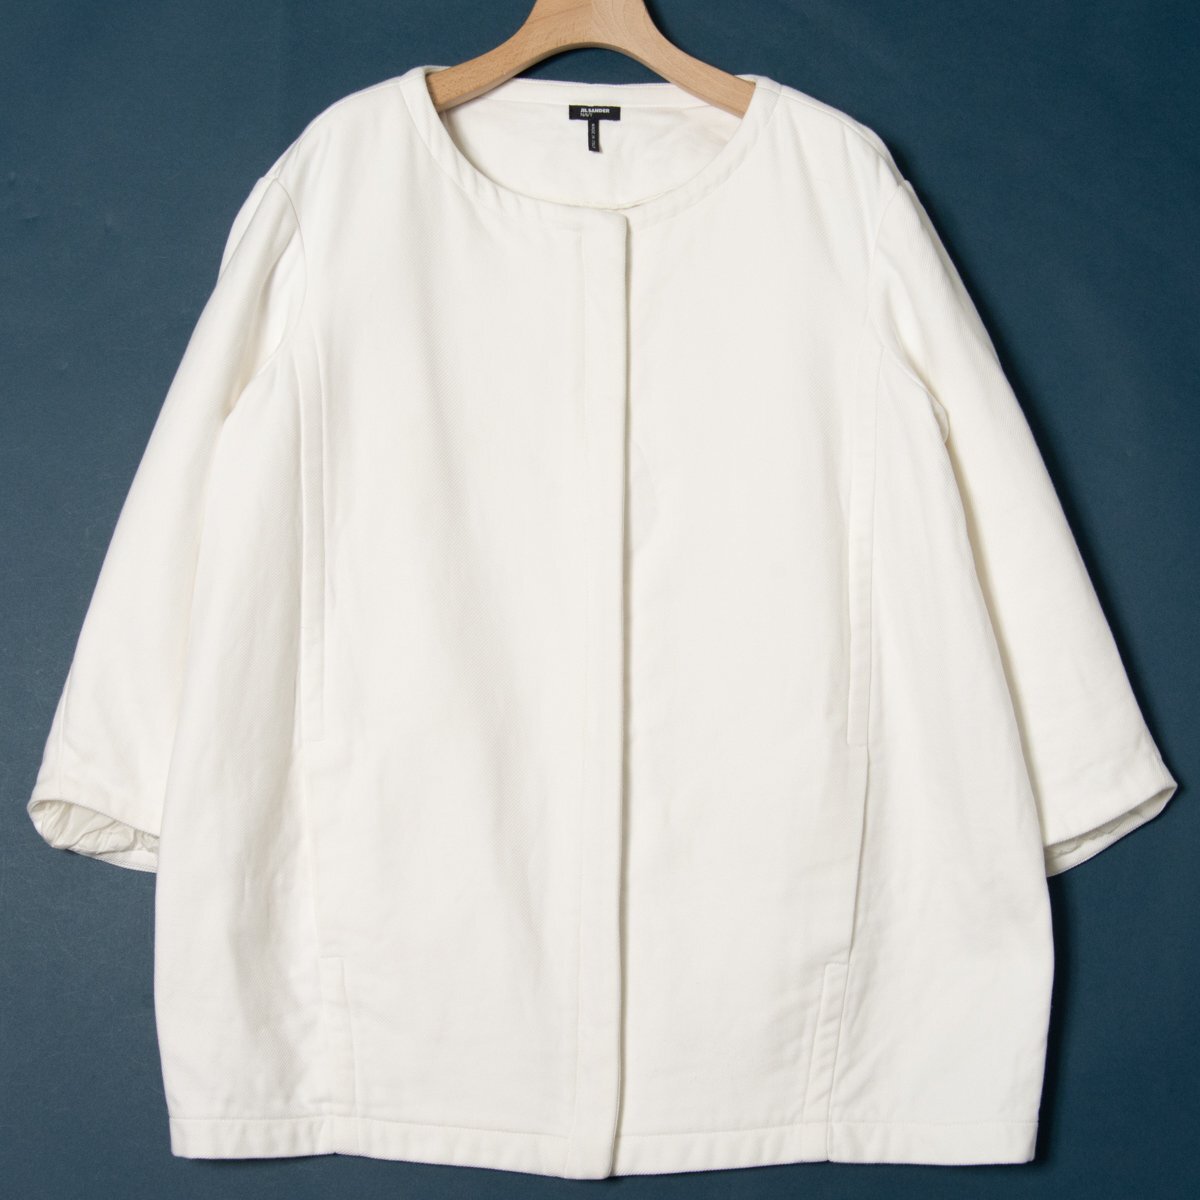 [1 jpy start ]JIL SANDER NAVY Jil Sander no color middle height coat outer cotton 100% simple spring autumn white 36 Italy made 